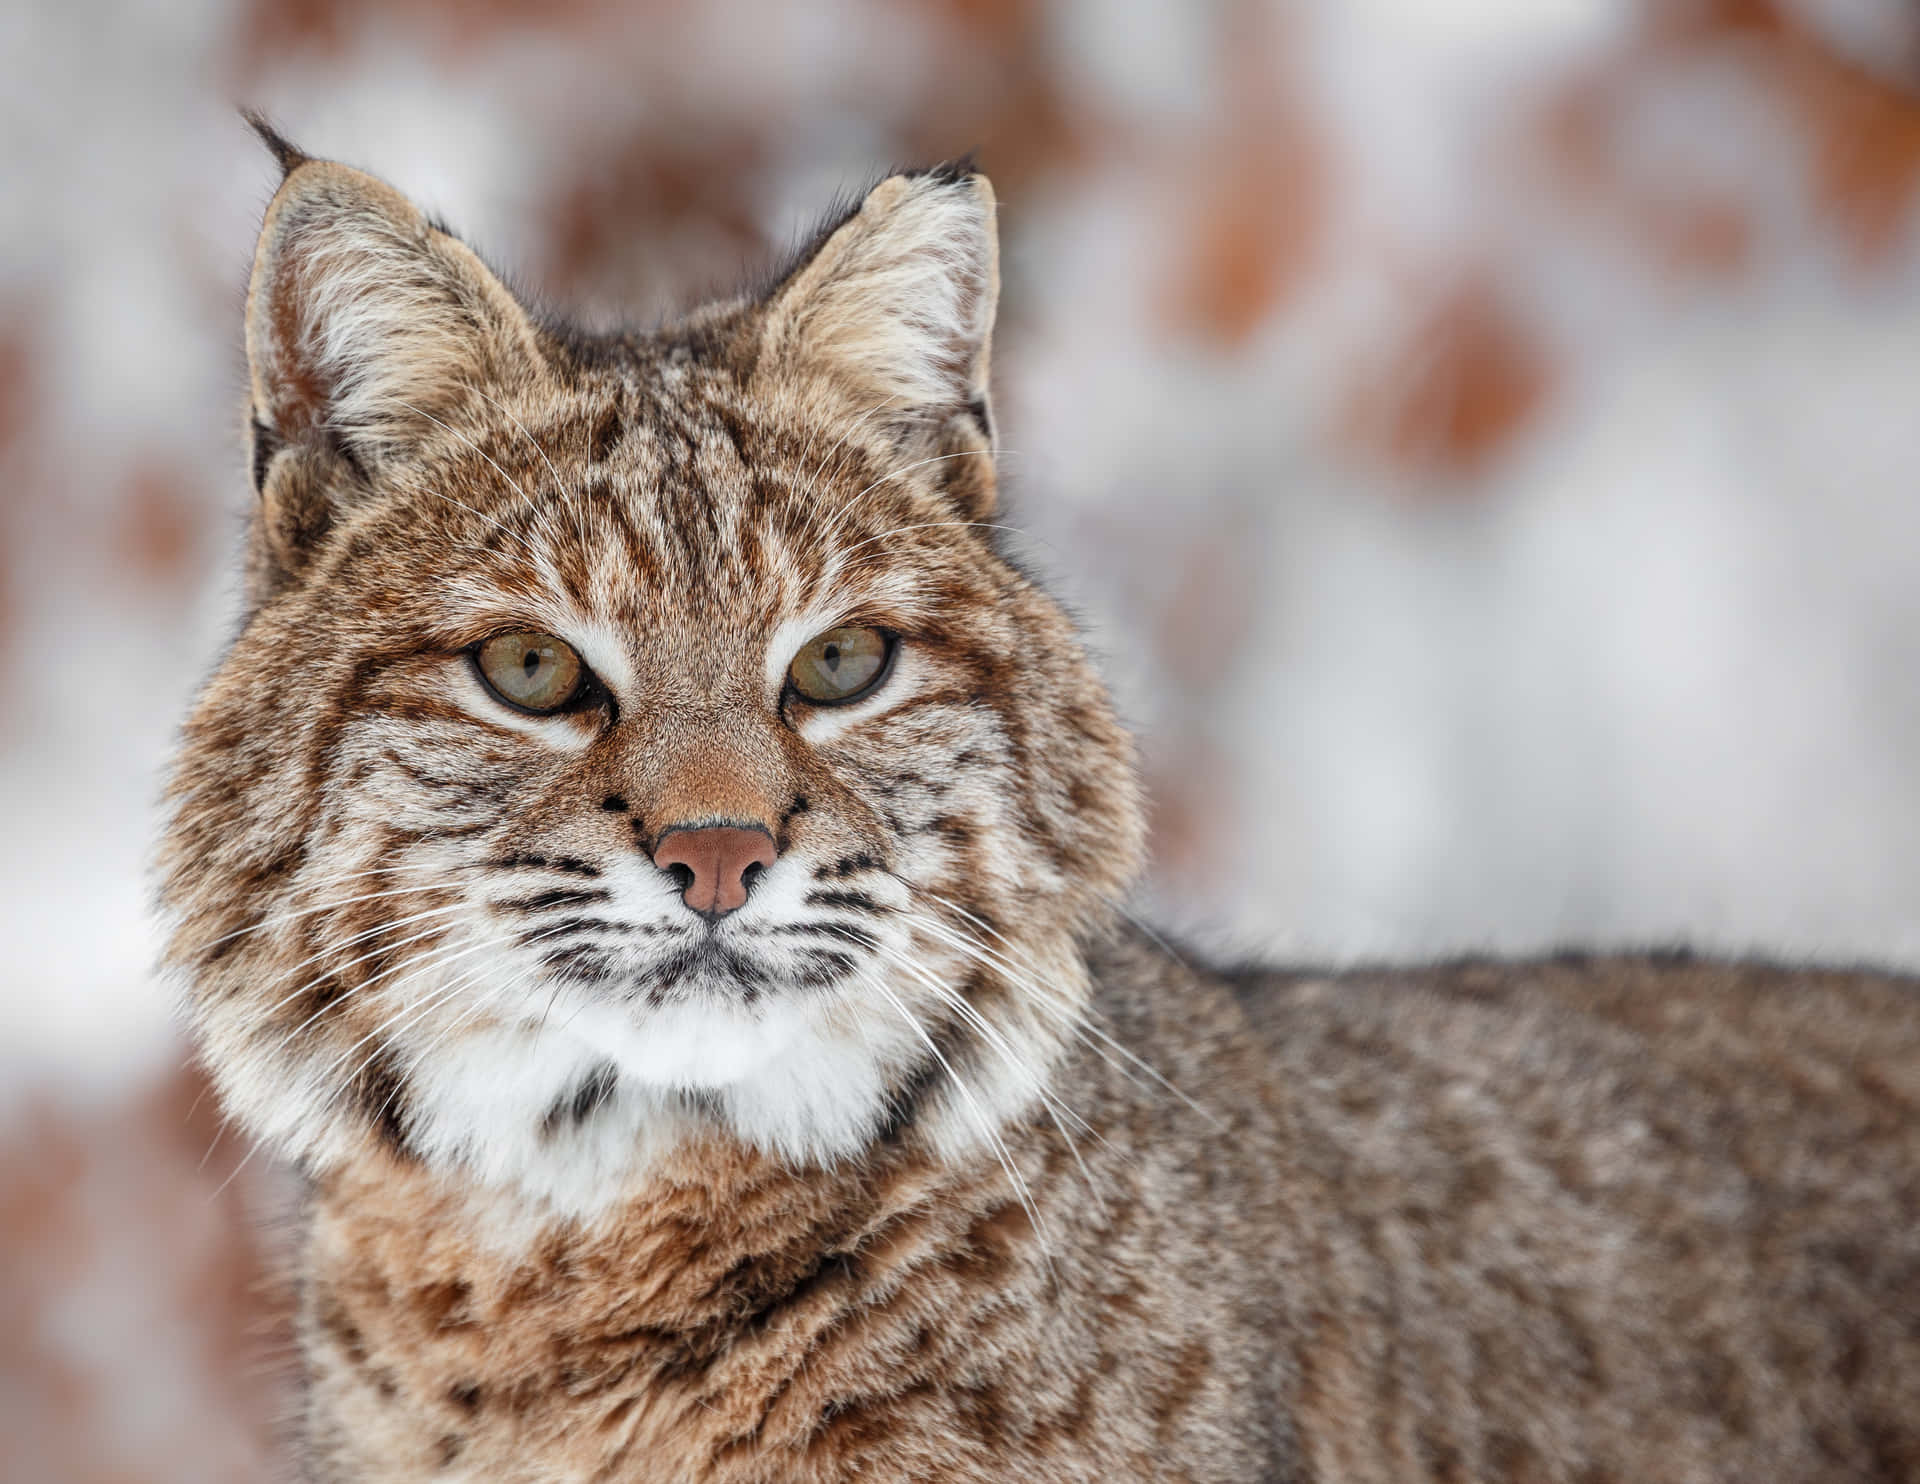 Bobcat, A Wild Cat of the North American Continent